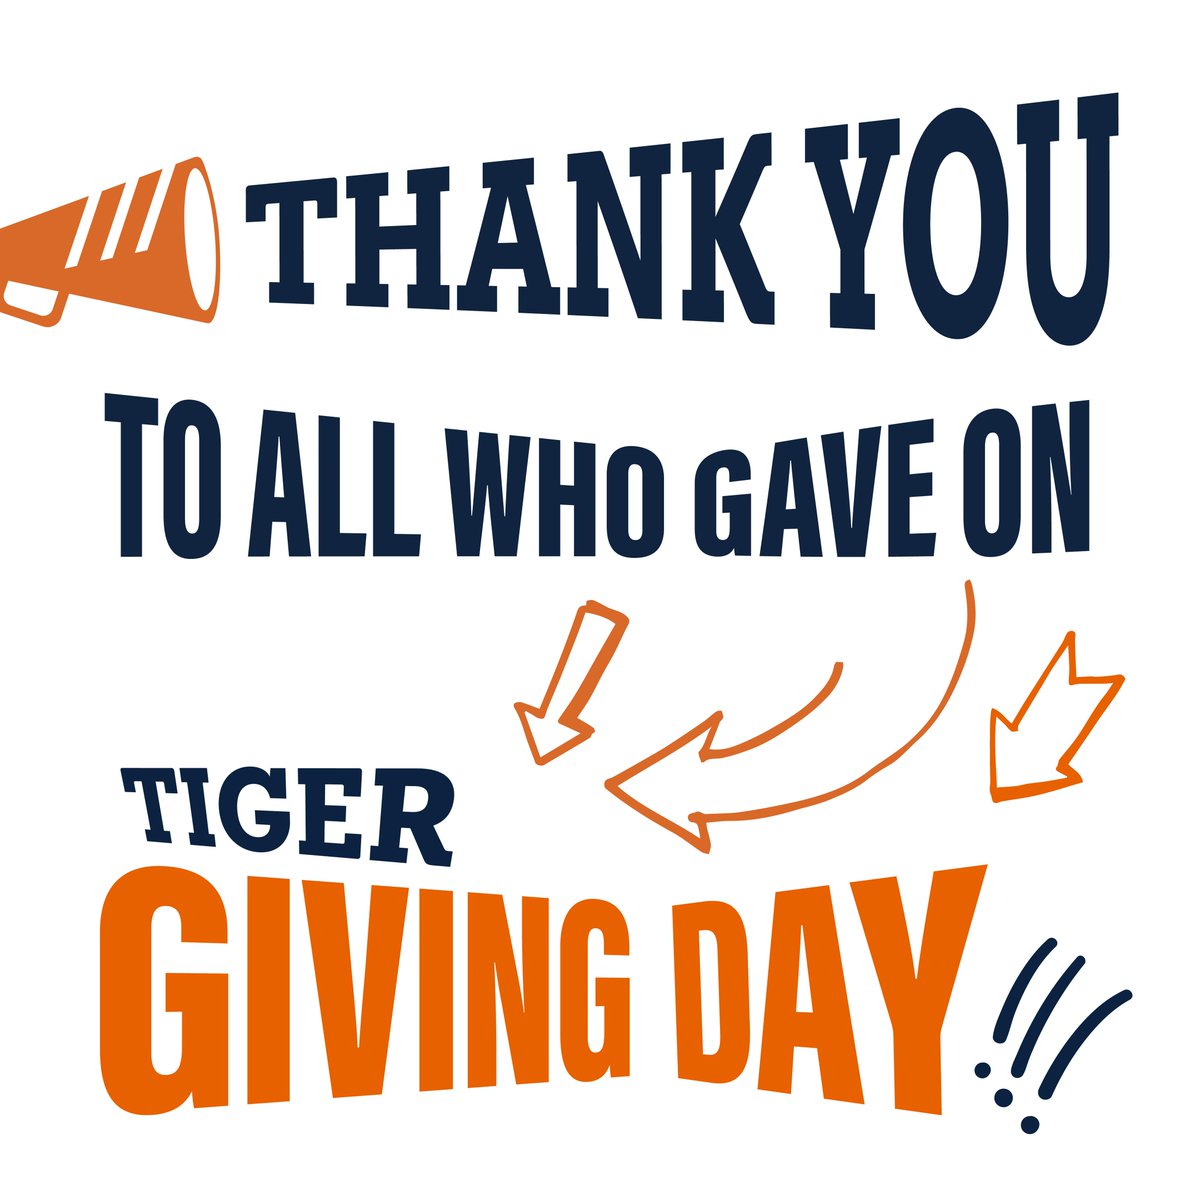 Thank you for your unwavering support of the College of Forestry, Wildlife and Environment's Tiger Giving Day initiatives. Together, we are making a profound impact on the future of forestry, wildlife, and environmental education.

#WeAreCFWE | #TigerGivingDay | #WarEagle